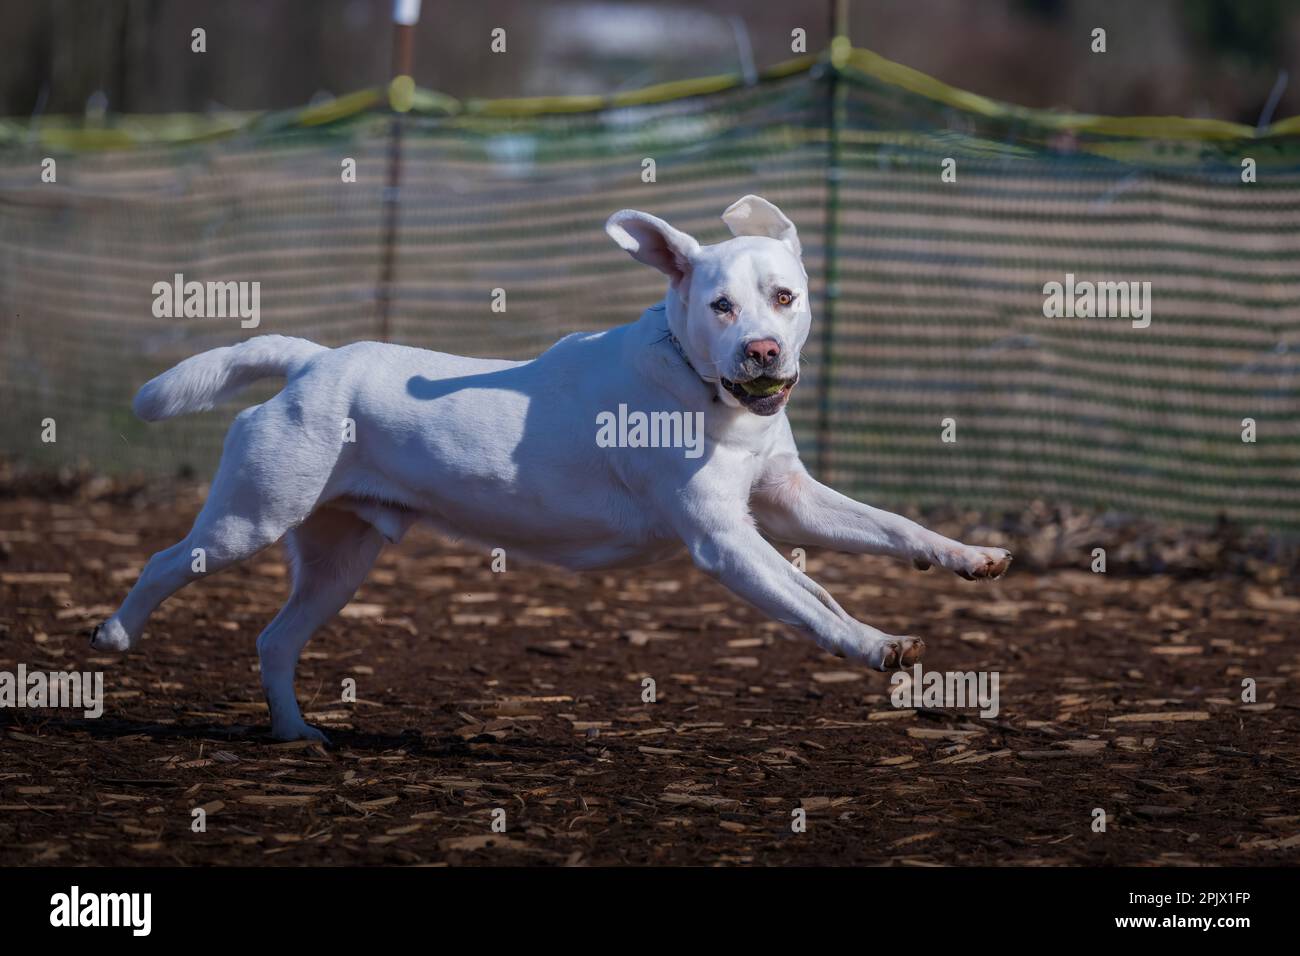 A cheerful white dog is running across a sun-drenched dirt field, carrying a ball in its mouth Stock Photo